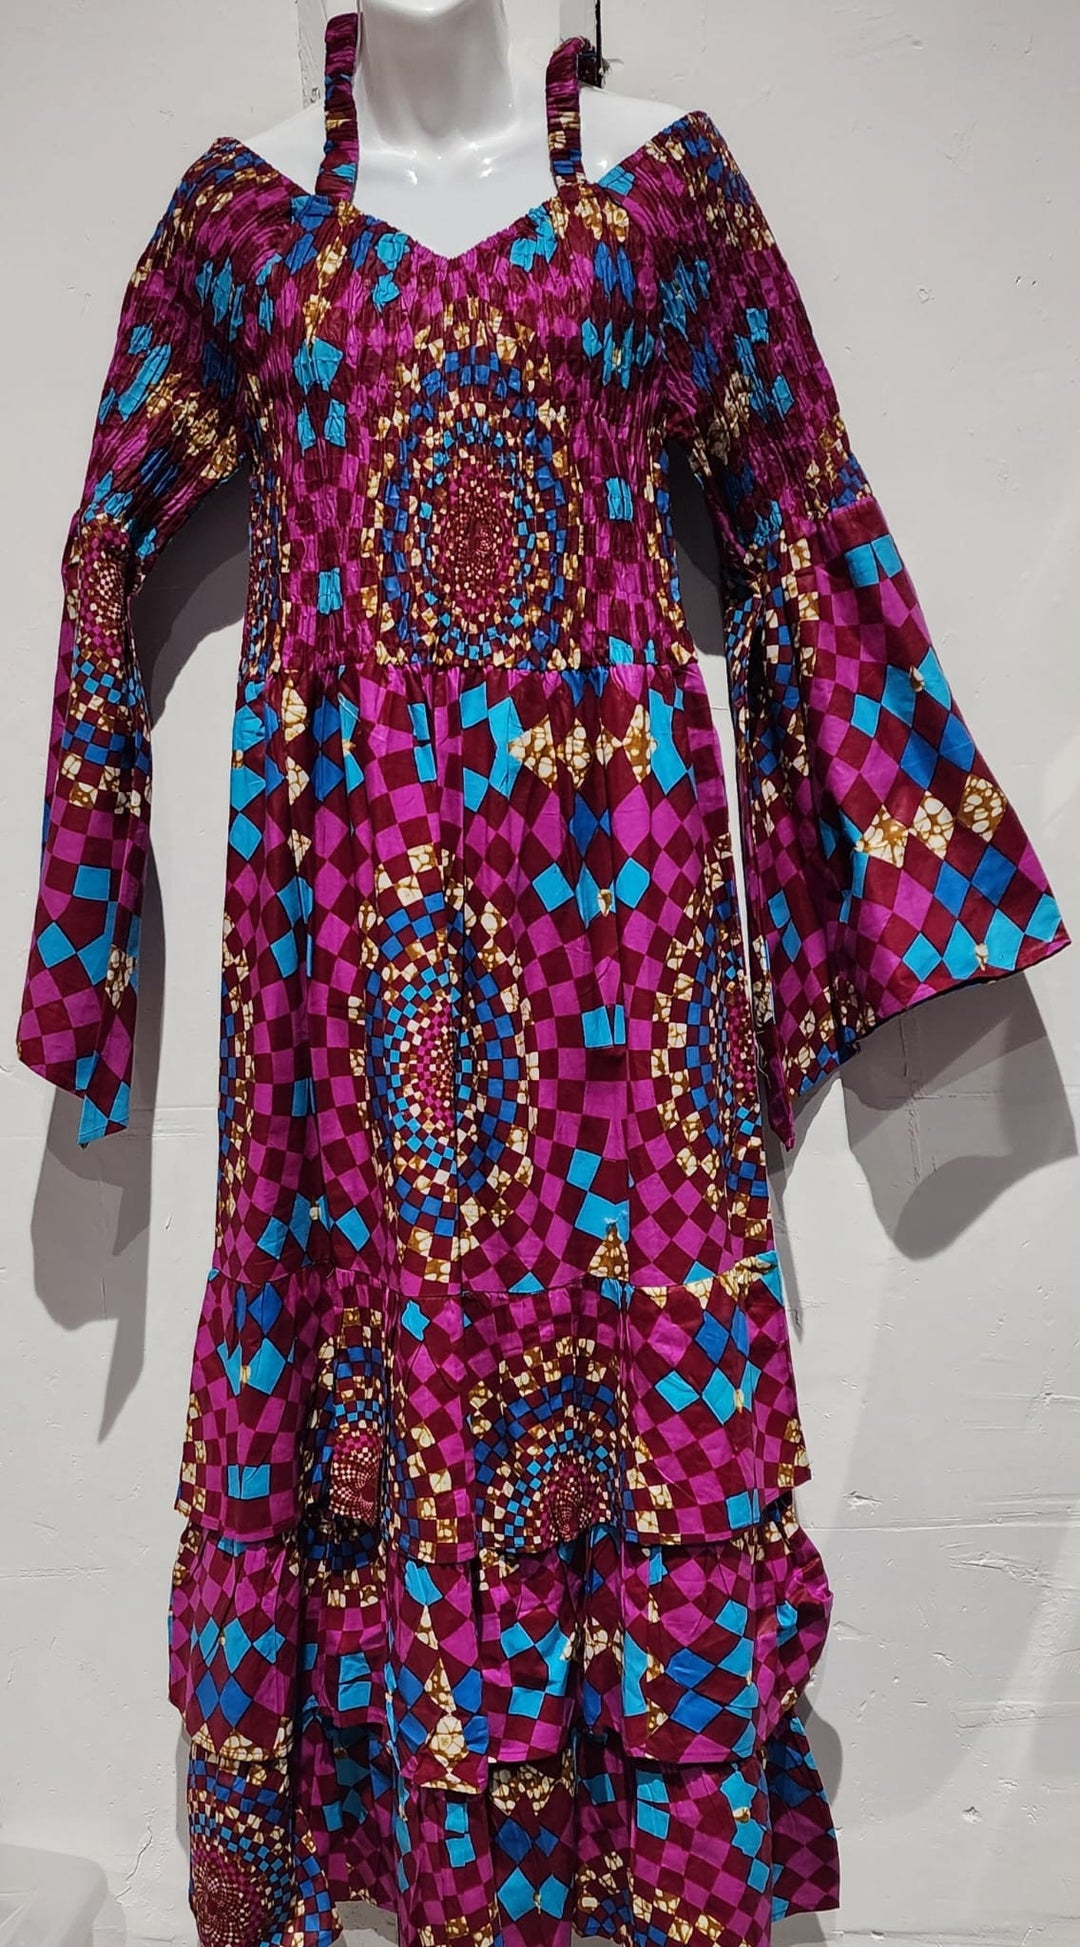 Multi-colored women long sleeve long raffle dress, off shoulder with elastic, two side pockets and head scarf.